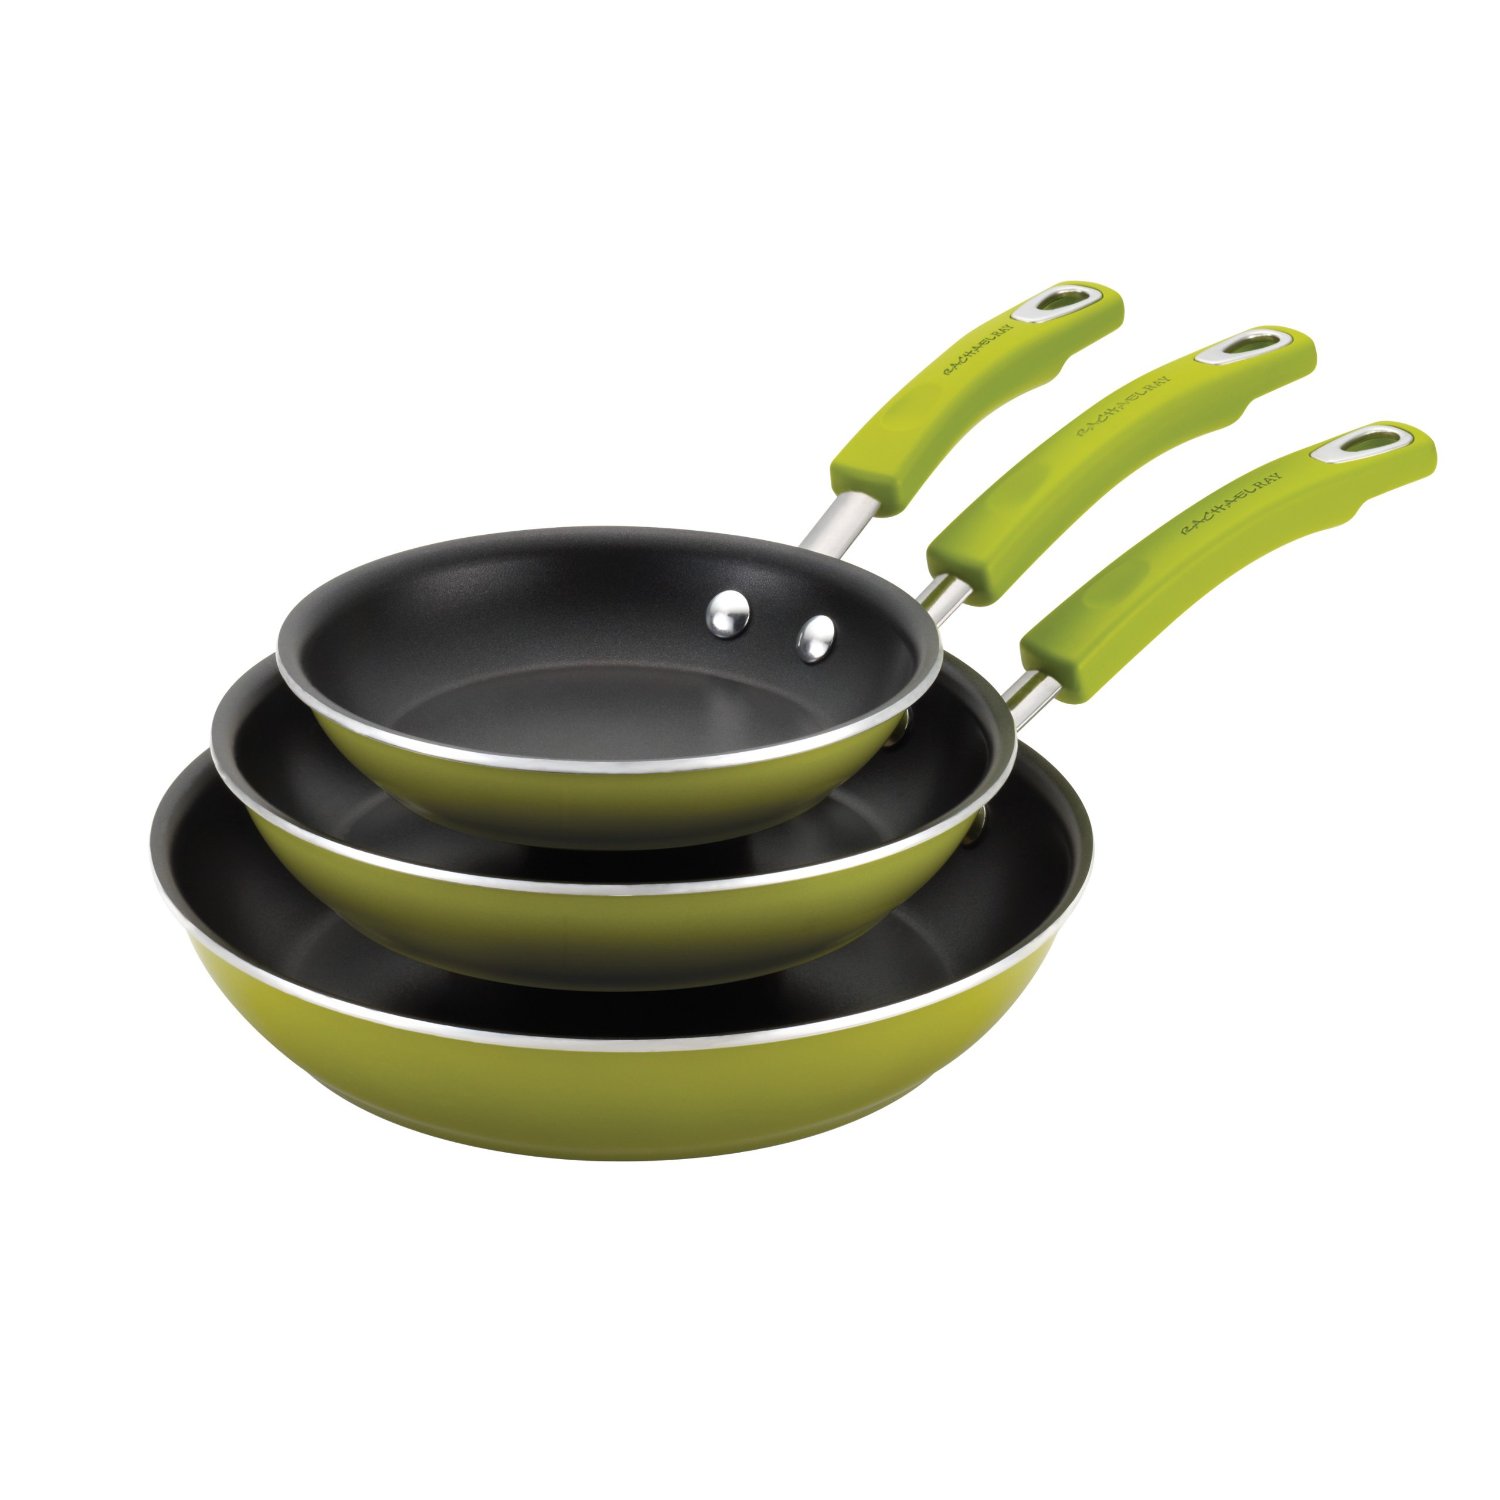 Click to order these nifty nonstick, PFOA free, enameled cast iron pans from the Fluffy's Trusted Amazon Partner.)